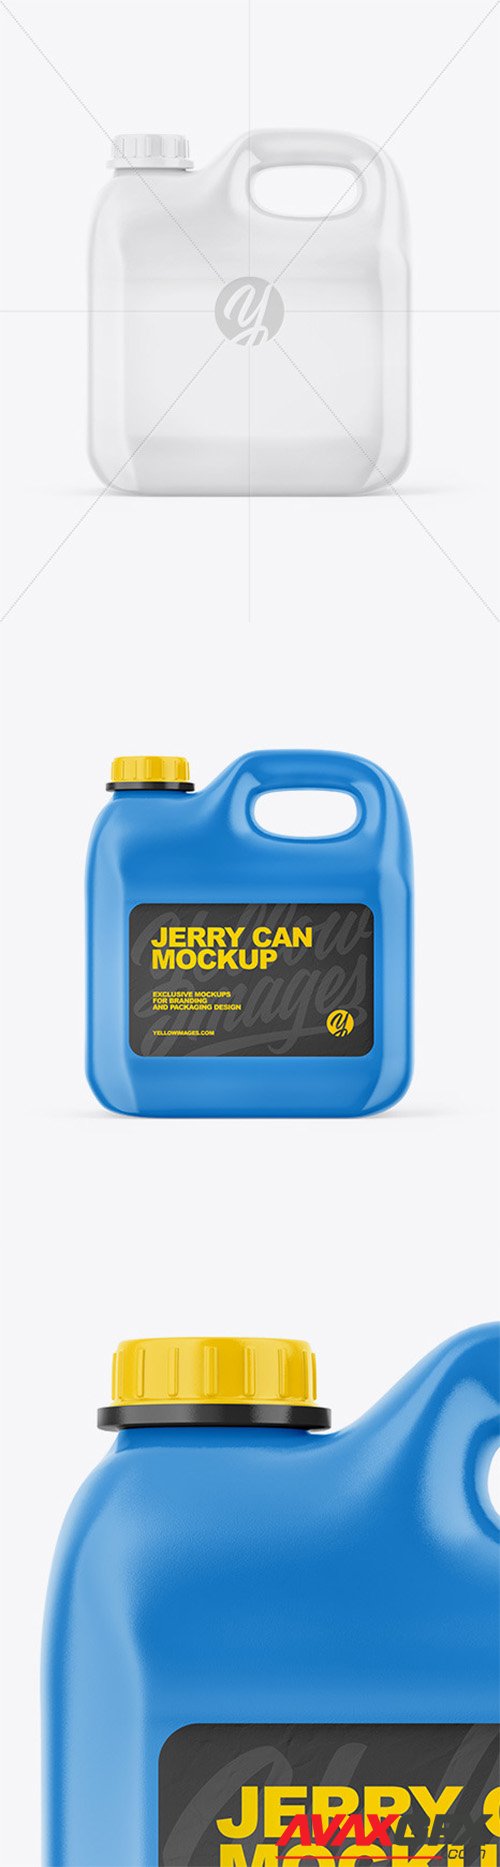 Glossy Jerry Can Mockup 61205